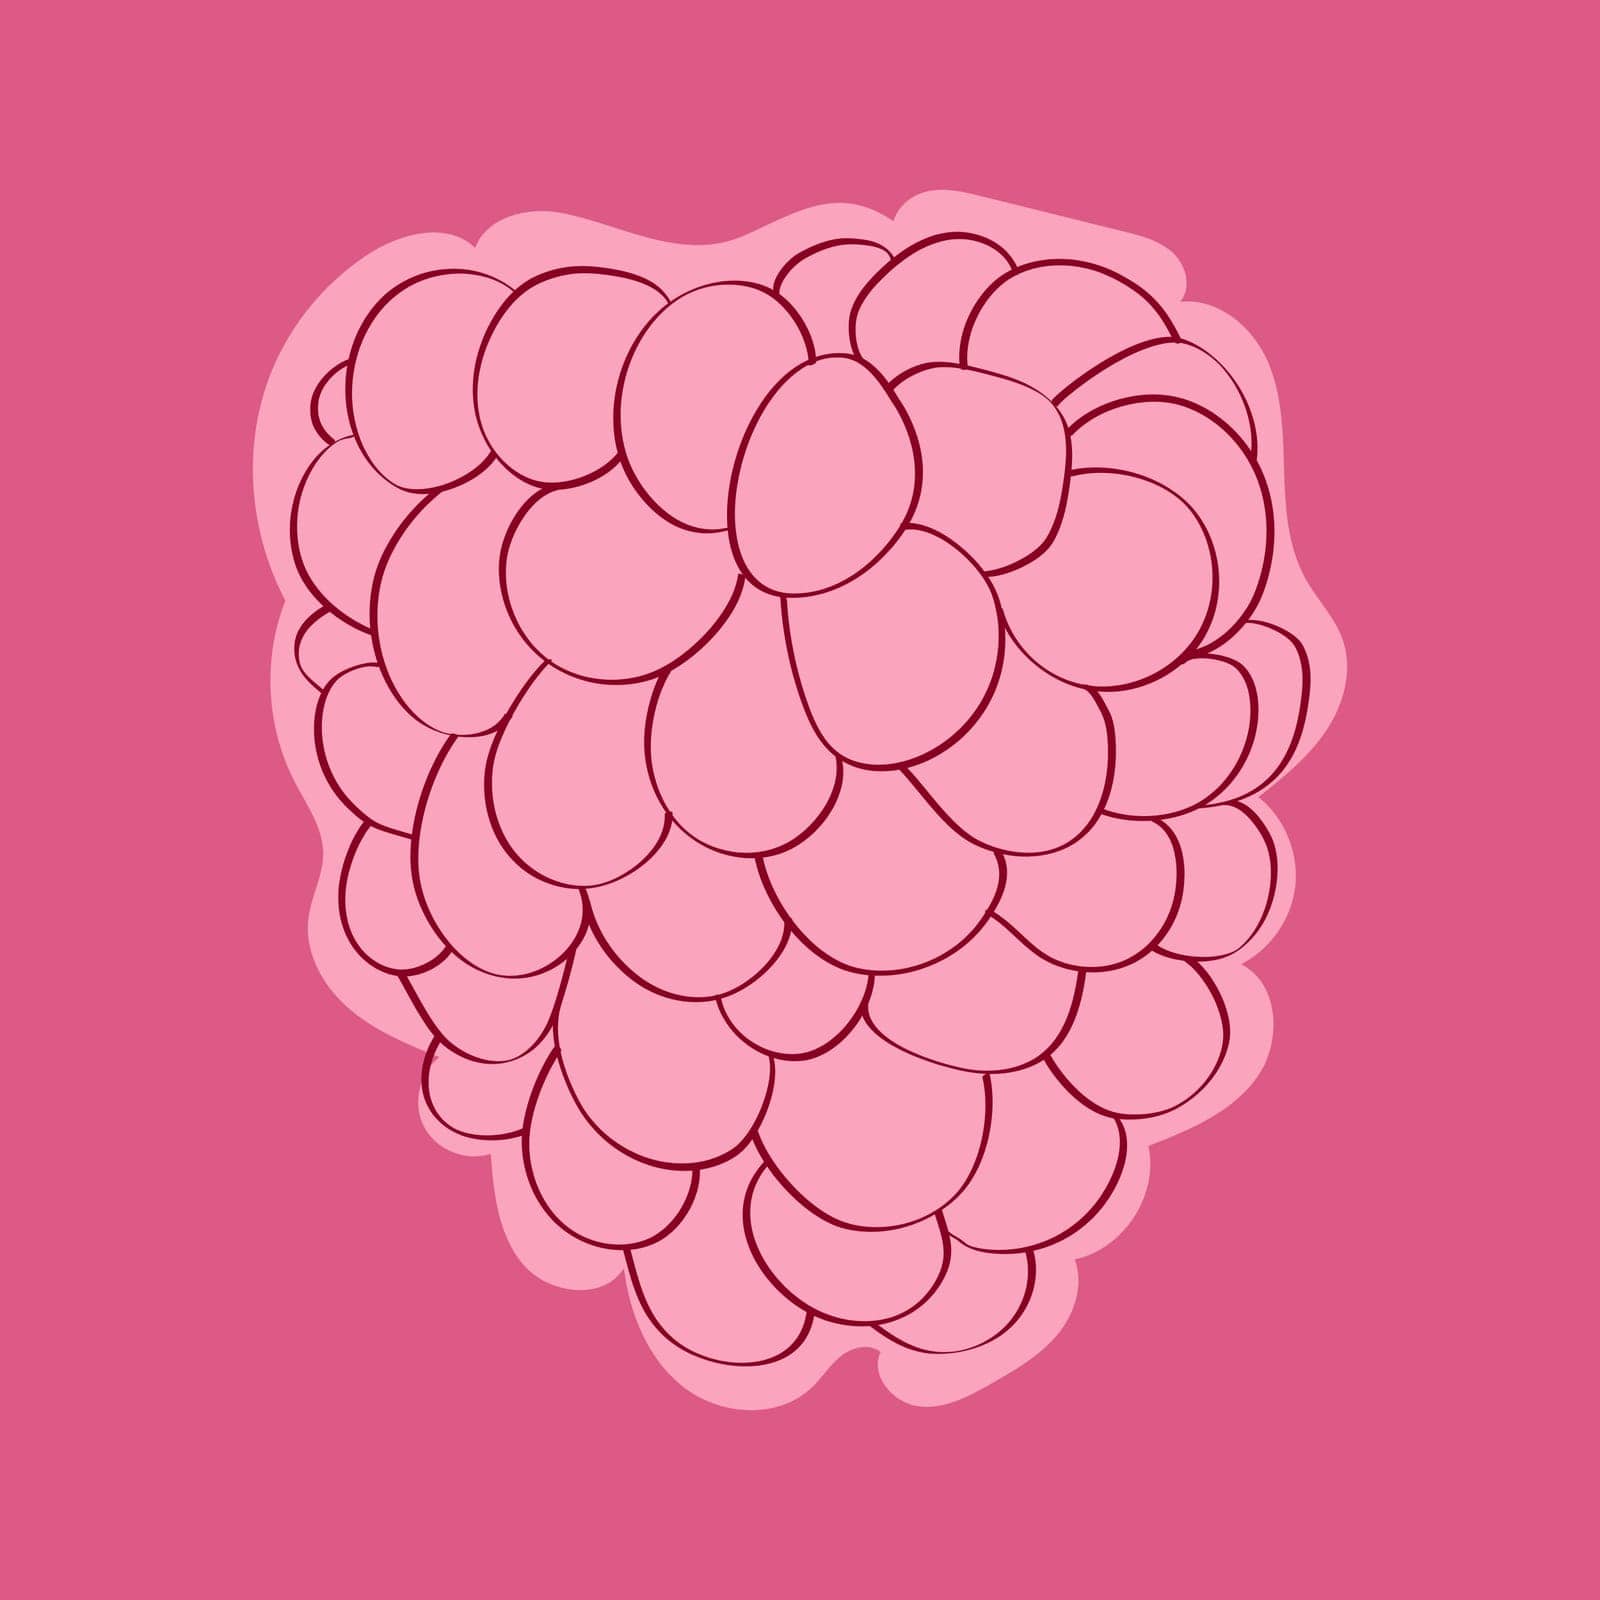 Hand-painted raspberry is placed on a solid pink background. The setting creates a vibrant and visually appealing composition